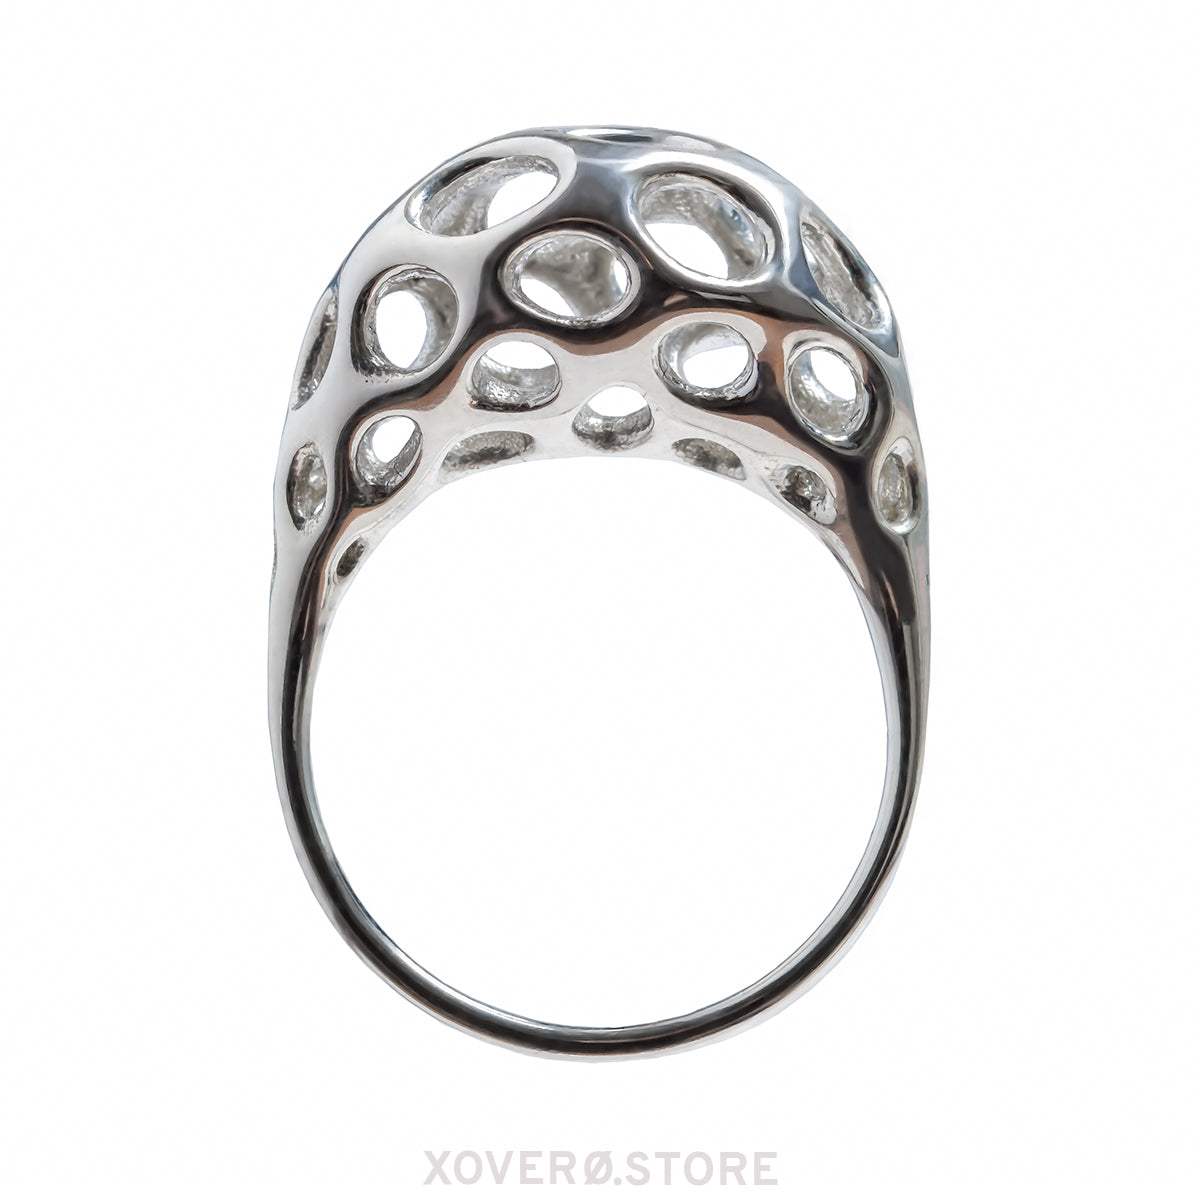 ORPHEUS - 3d Printed Ring - Sterling or Gold-Plated